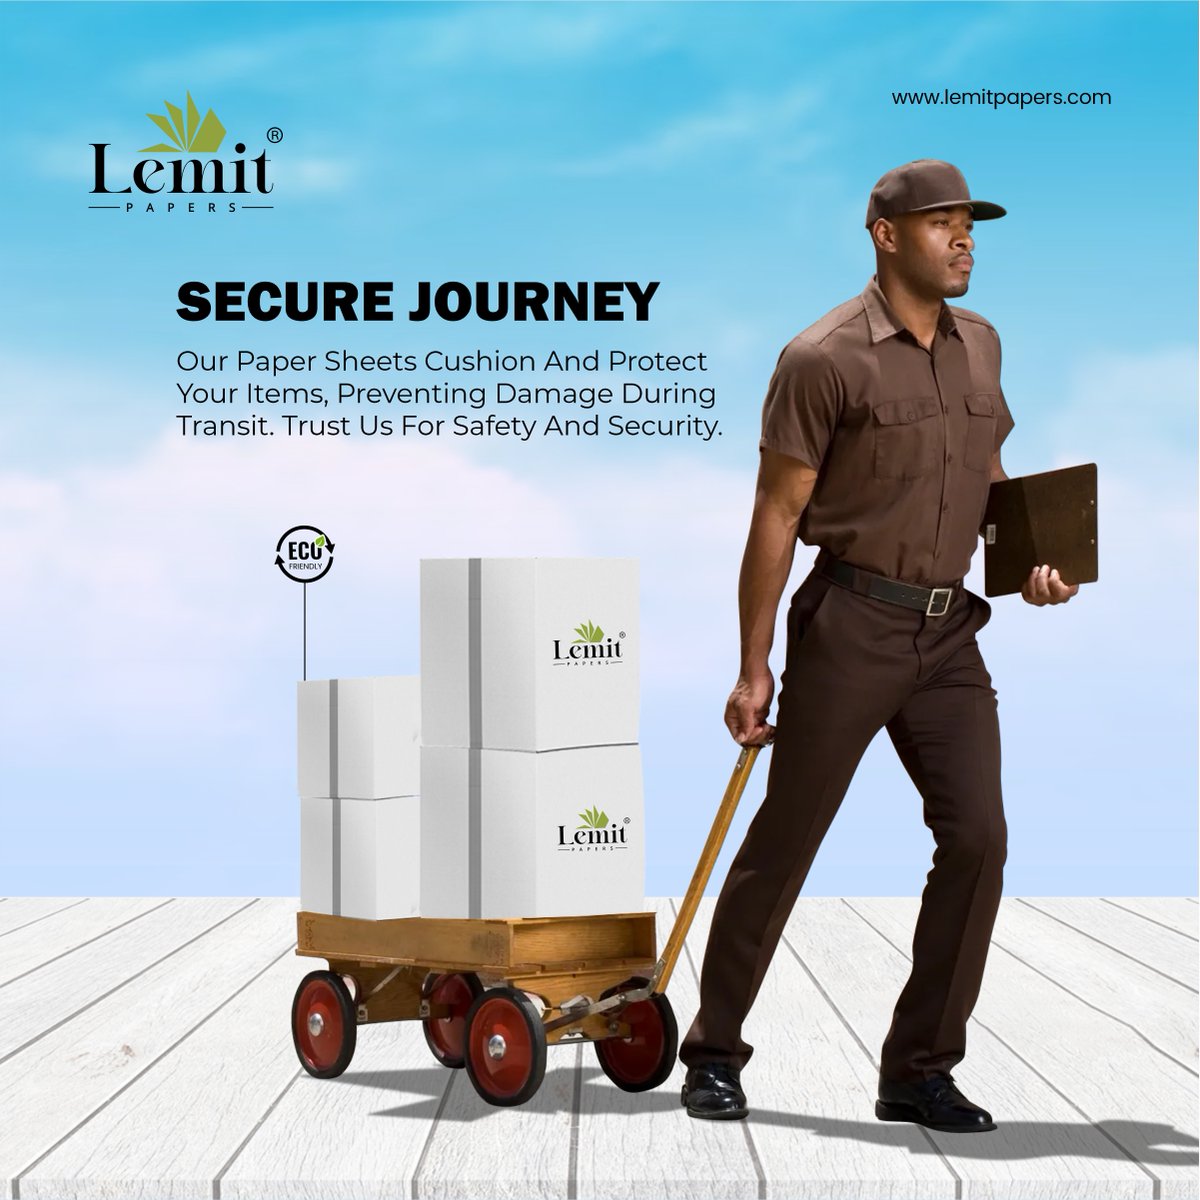 Our paper sheets provide cushioning and protection for your items, ensuring their safety and security during transit.
.
For More Info visit website:
lemitpapers.com
.
#packaging #duplexboard #paperboard #paperindustry #papermanufacturer #packagingindustry #LemitPapers